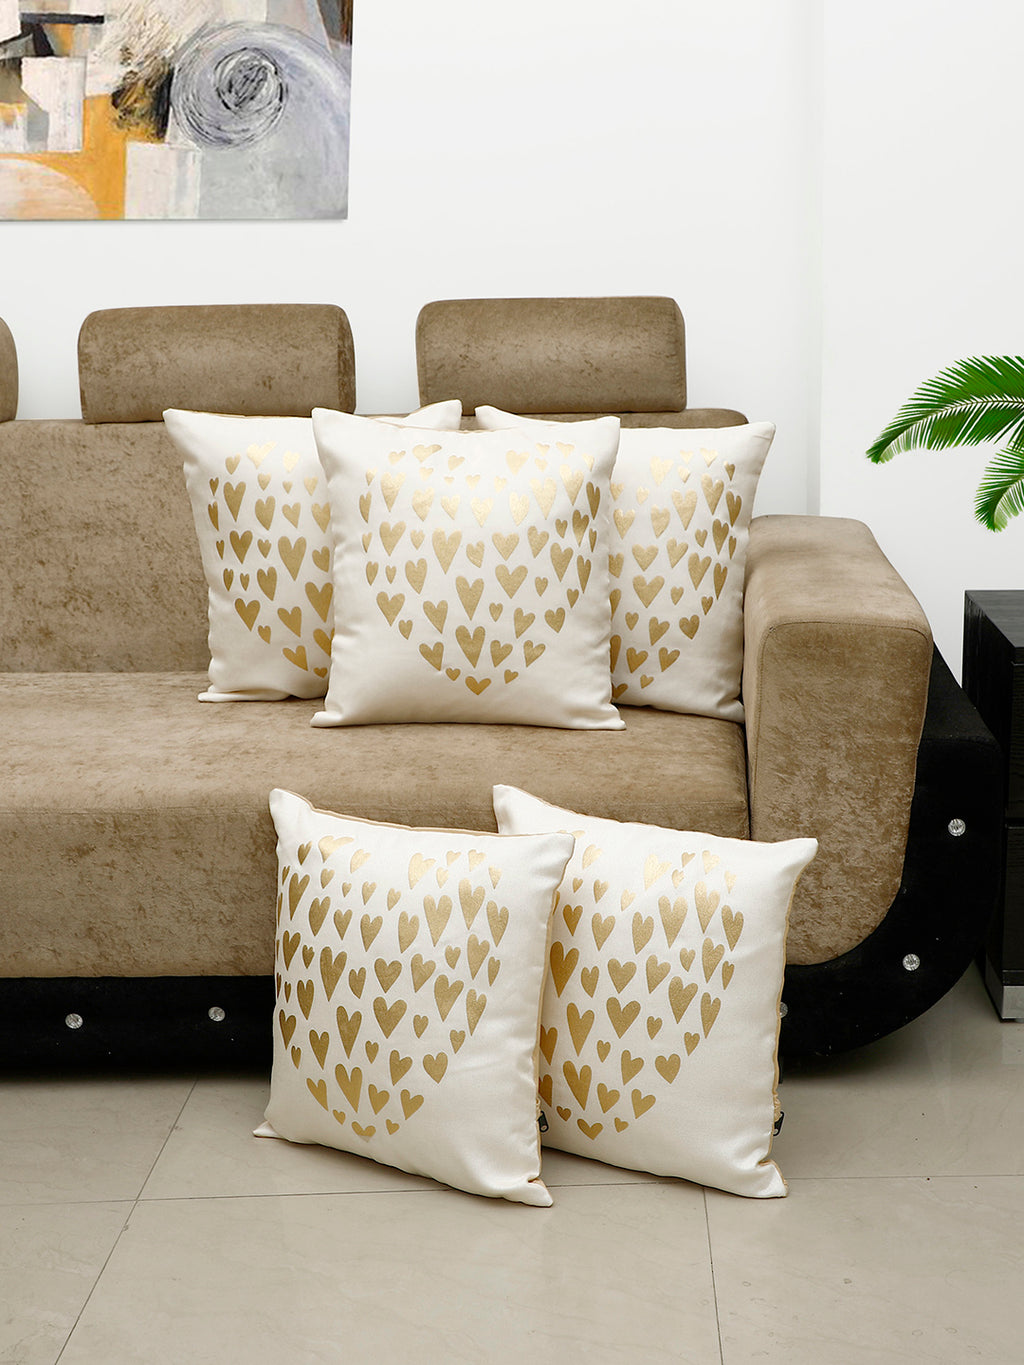 Detec™ Hosta Beige Golden Heart Printed 16 x 16 inches Cushion Cover (Set of 5 )